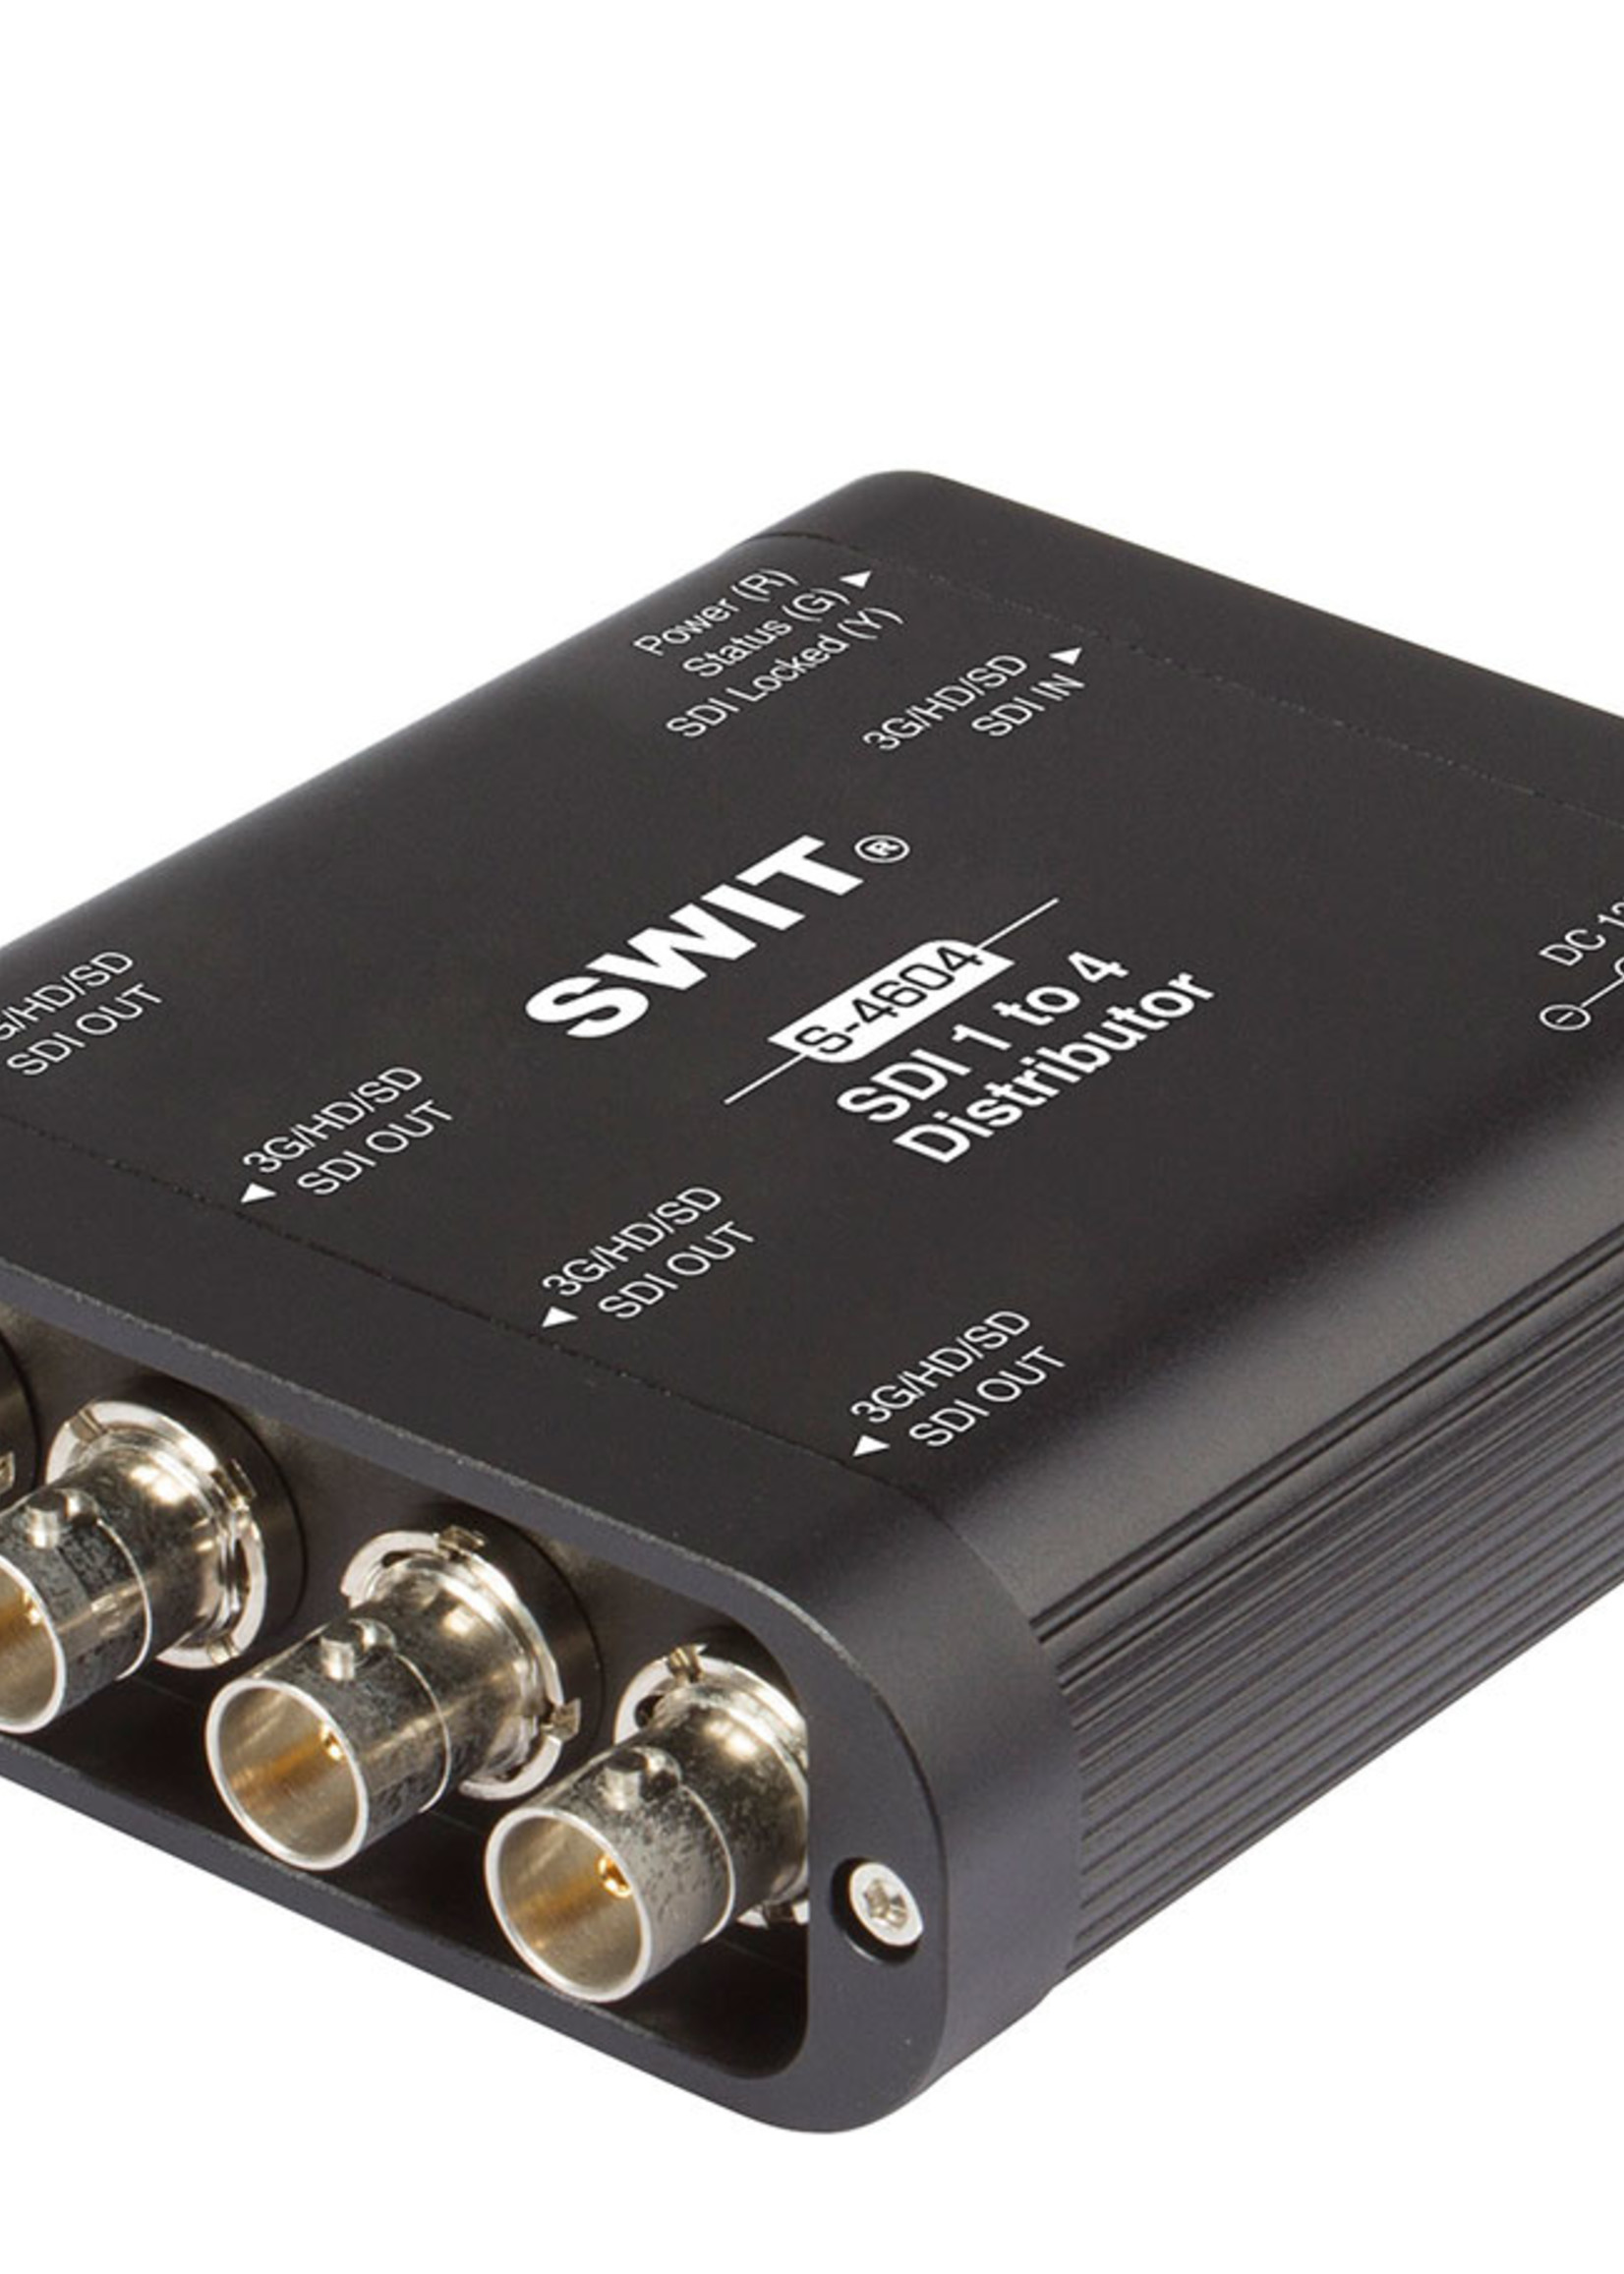 Swit S-4604 SDI 1 to 4 Distributor and Amplifier